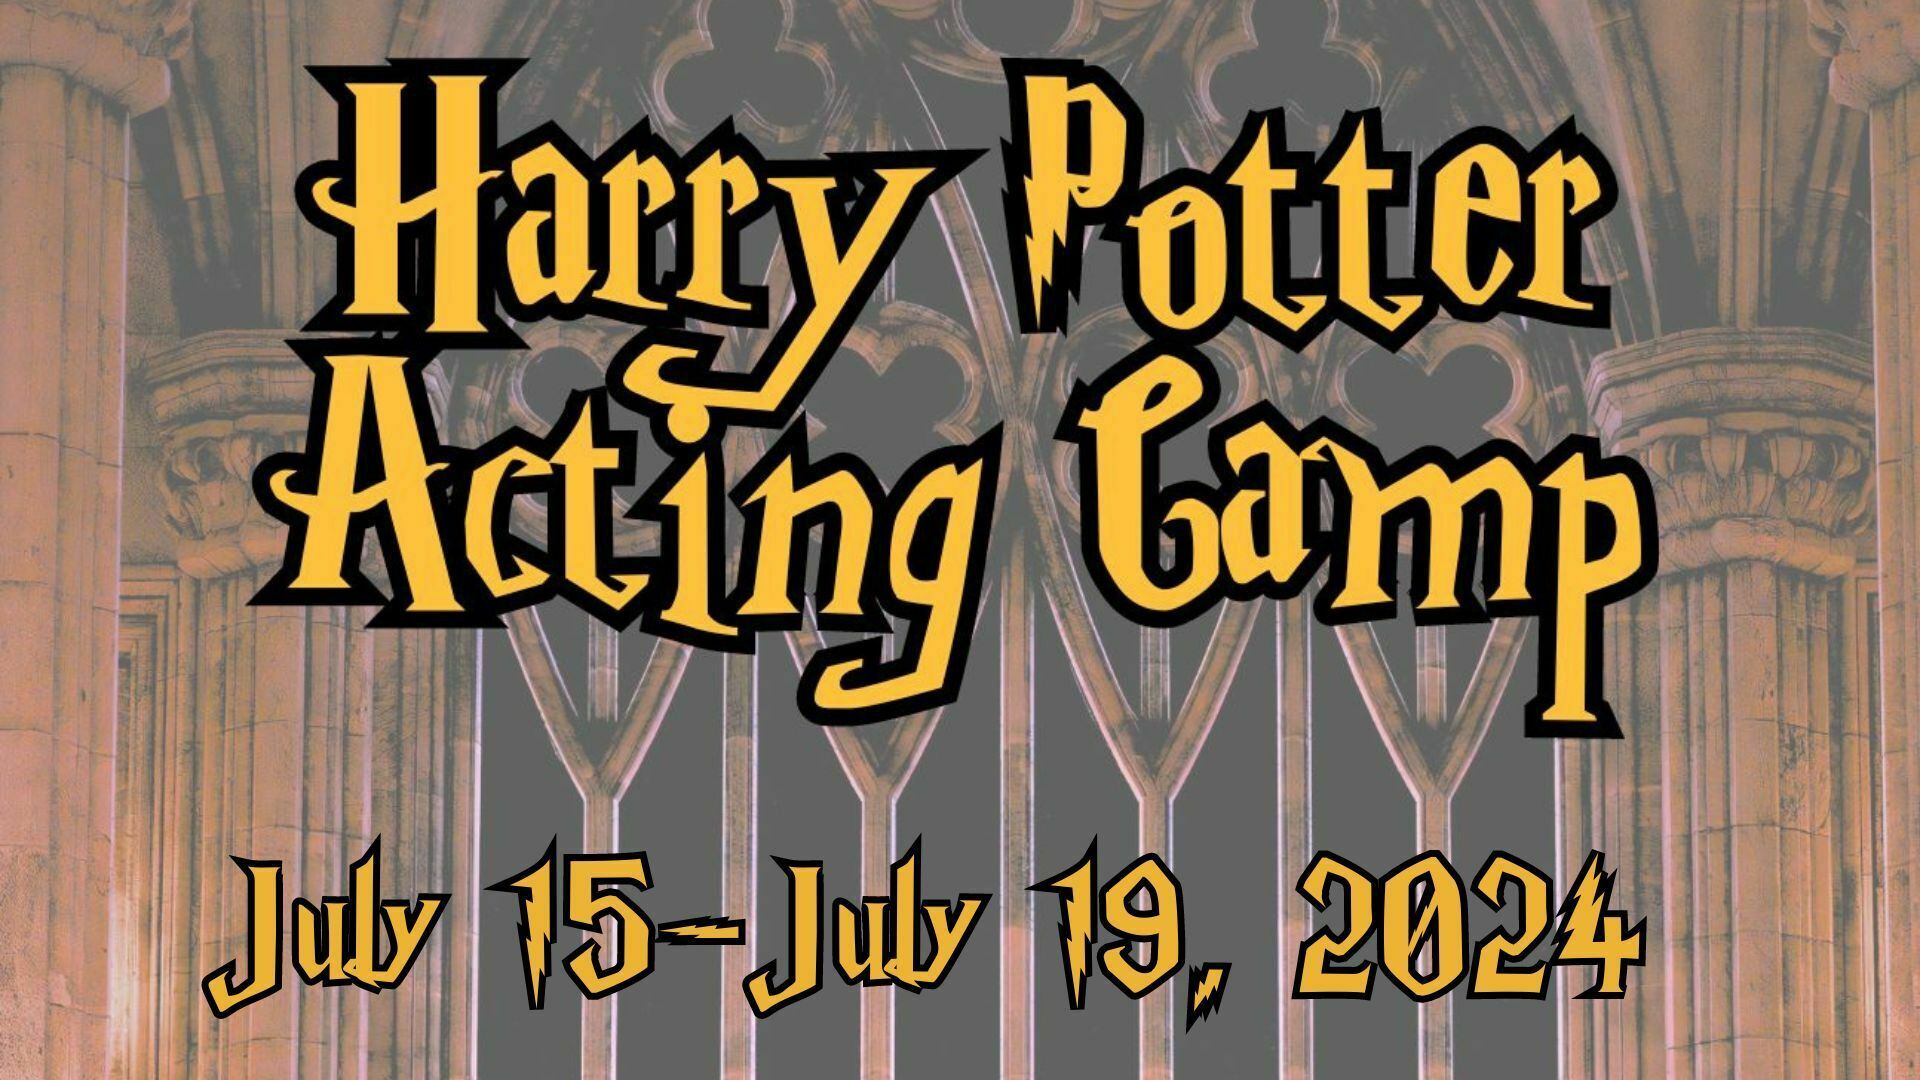 Harry Potter Acting Camp- Columbia Theatre Summer Theatre Camp, Longview, Washington, United States